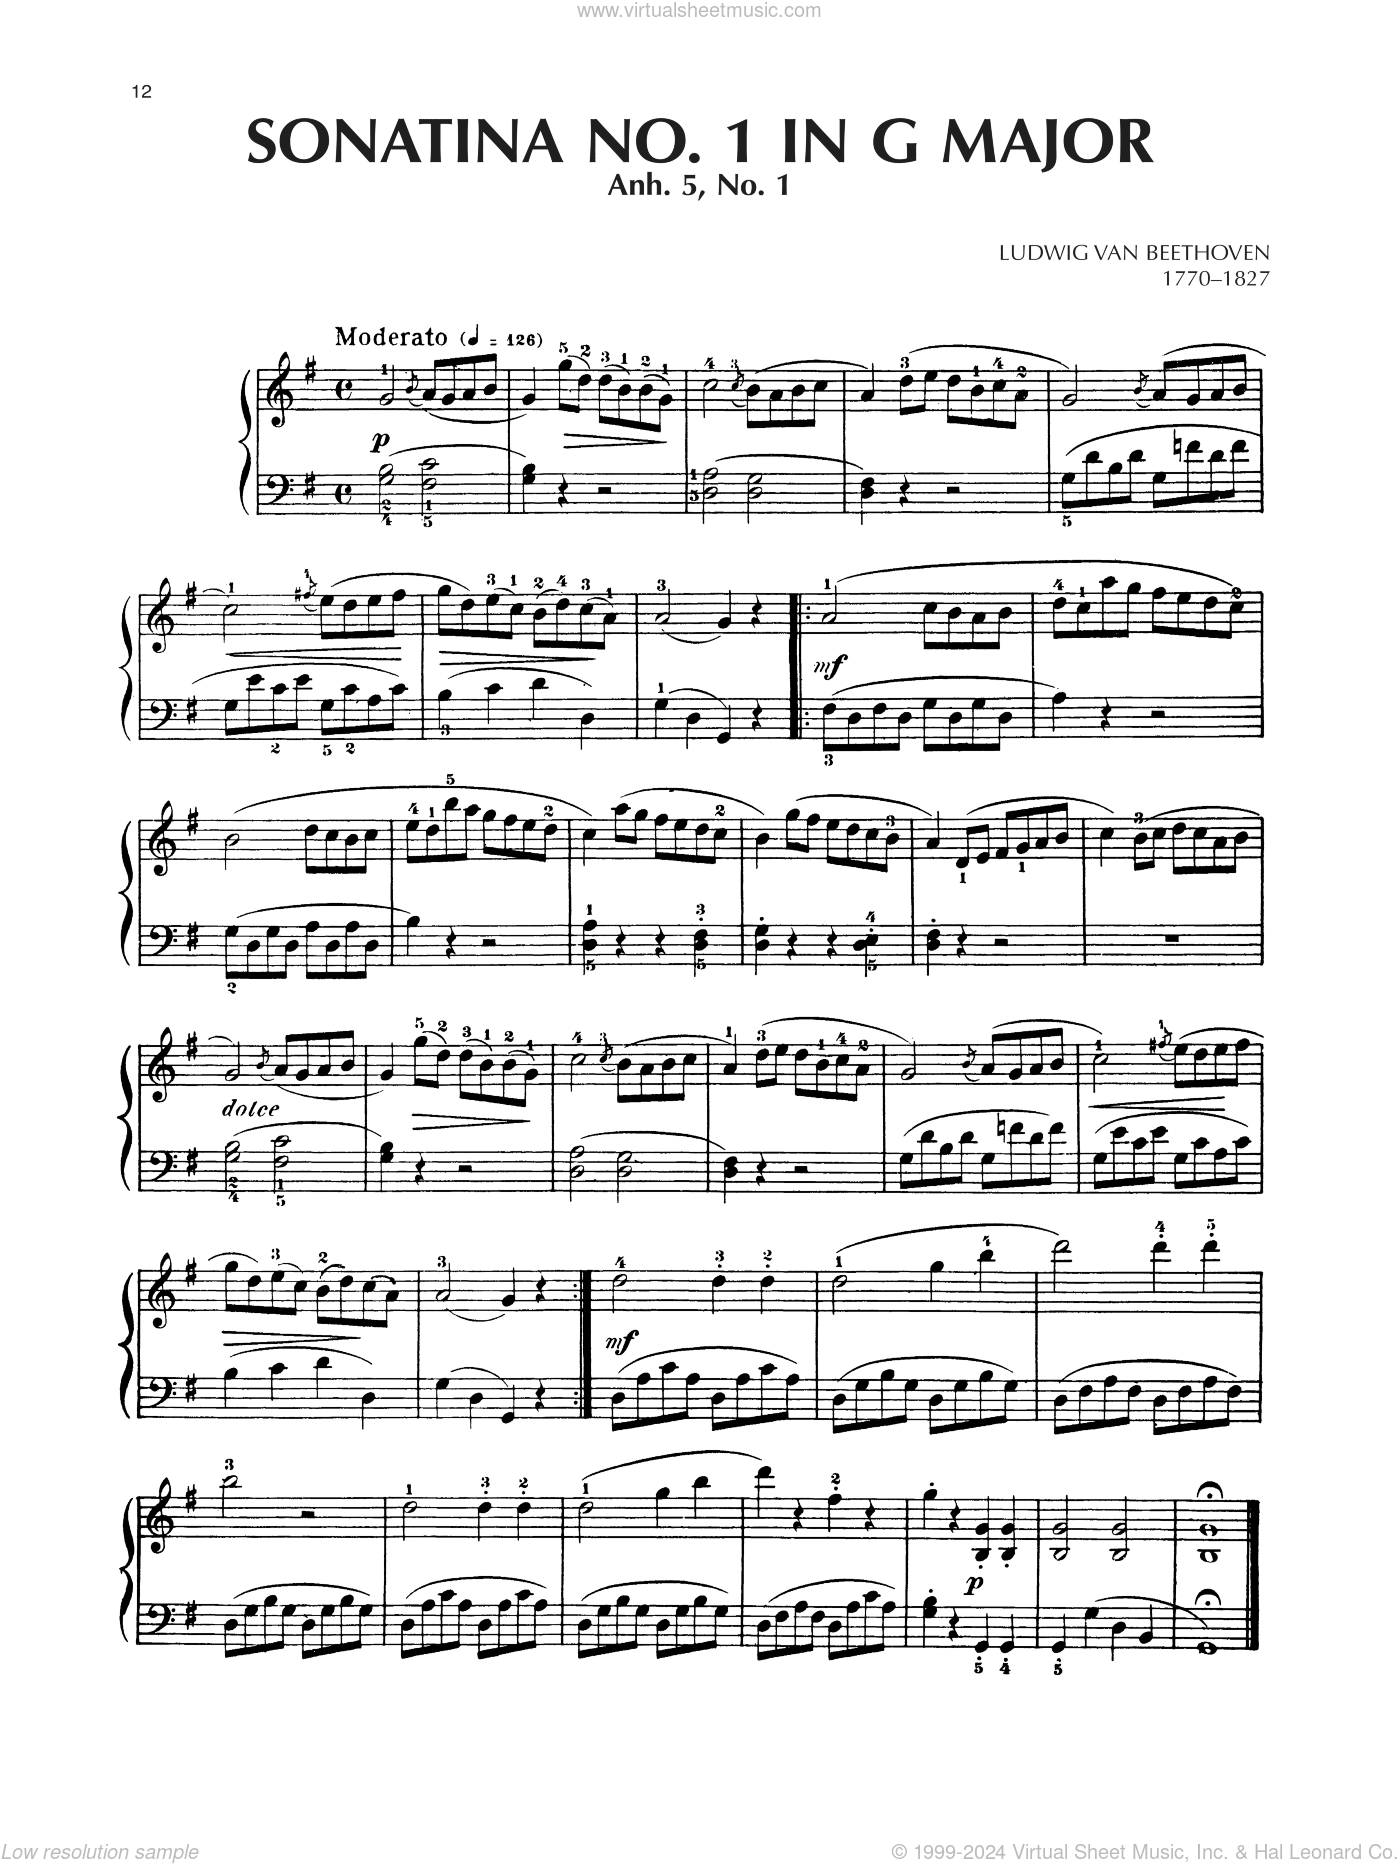 Beethoven - Sonatina In G Major, Anh. 5, No. 1 sheet music for piano solo